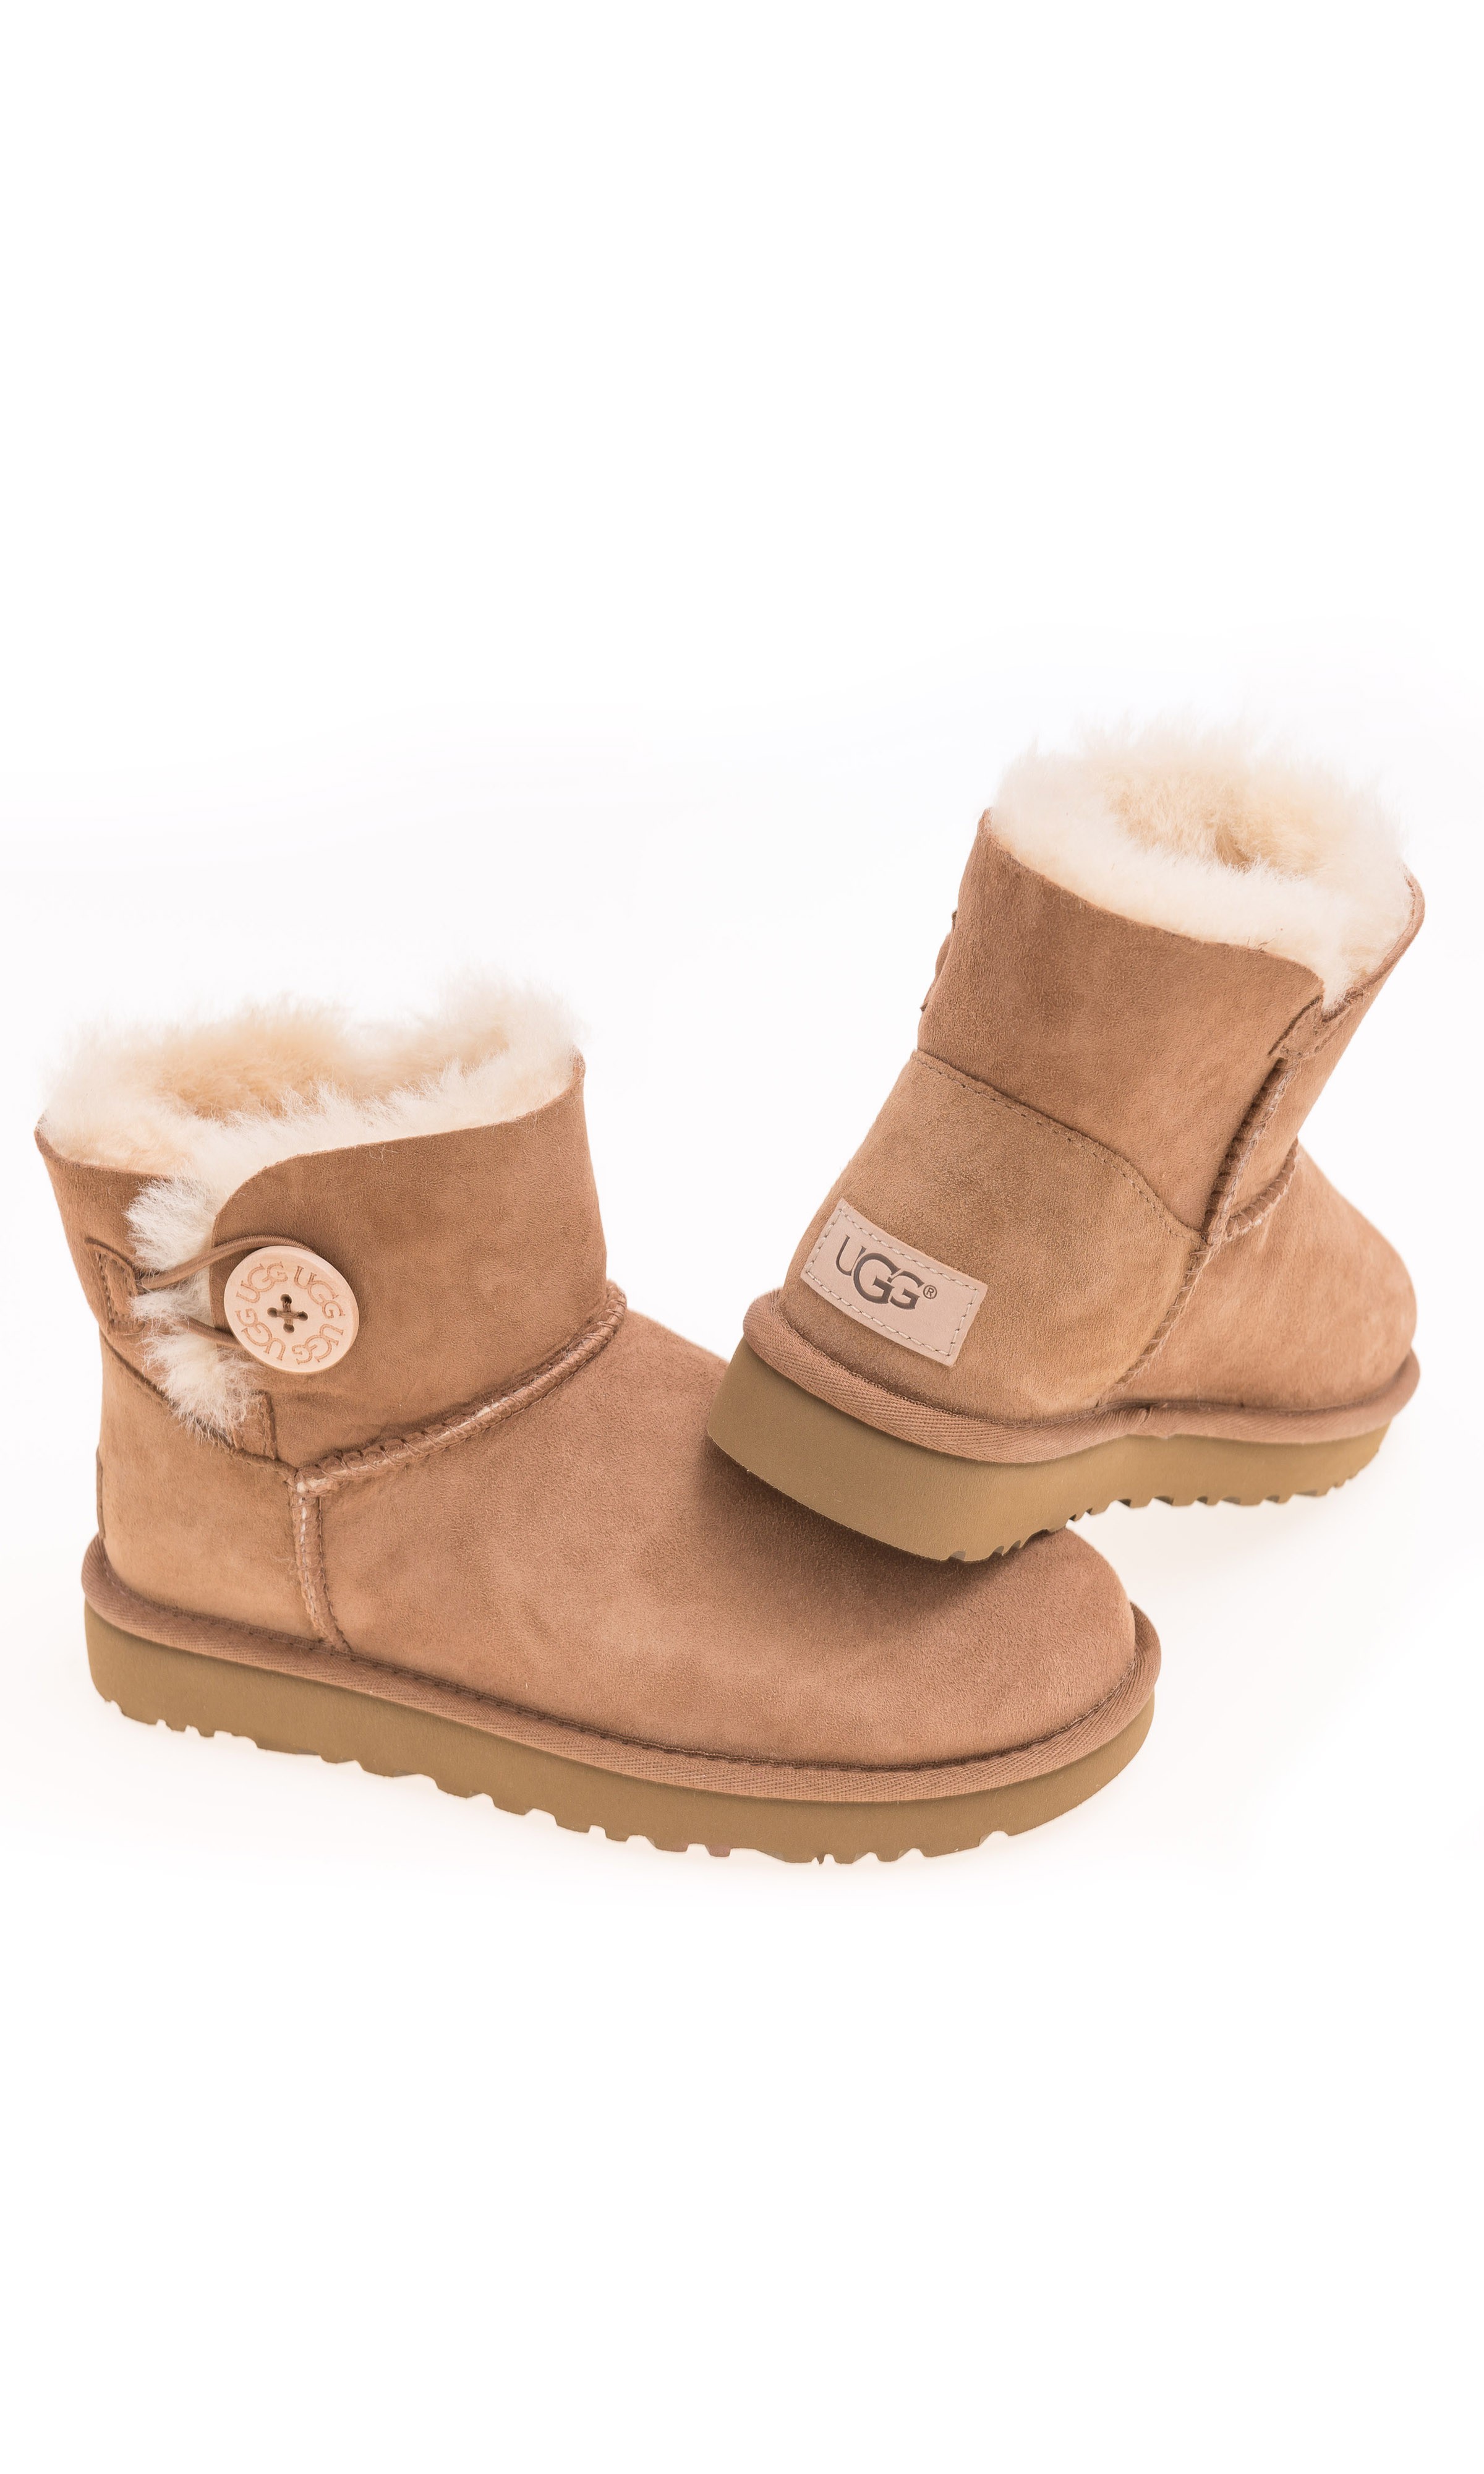 uggs with buttons on the side